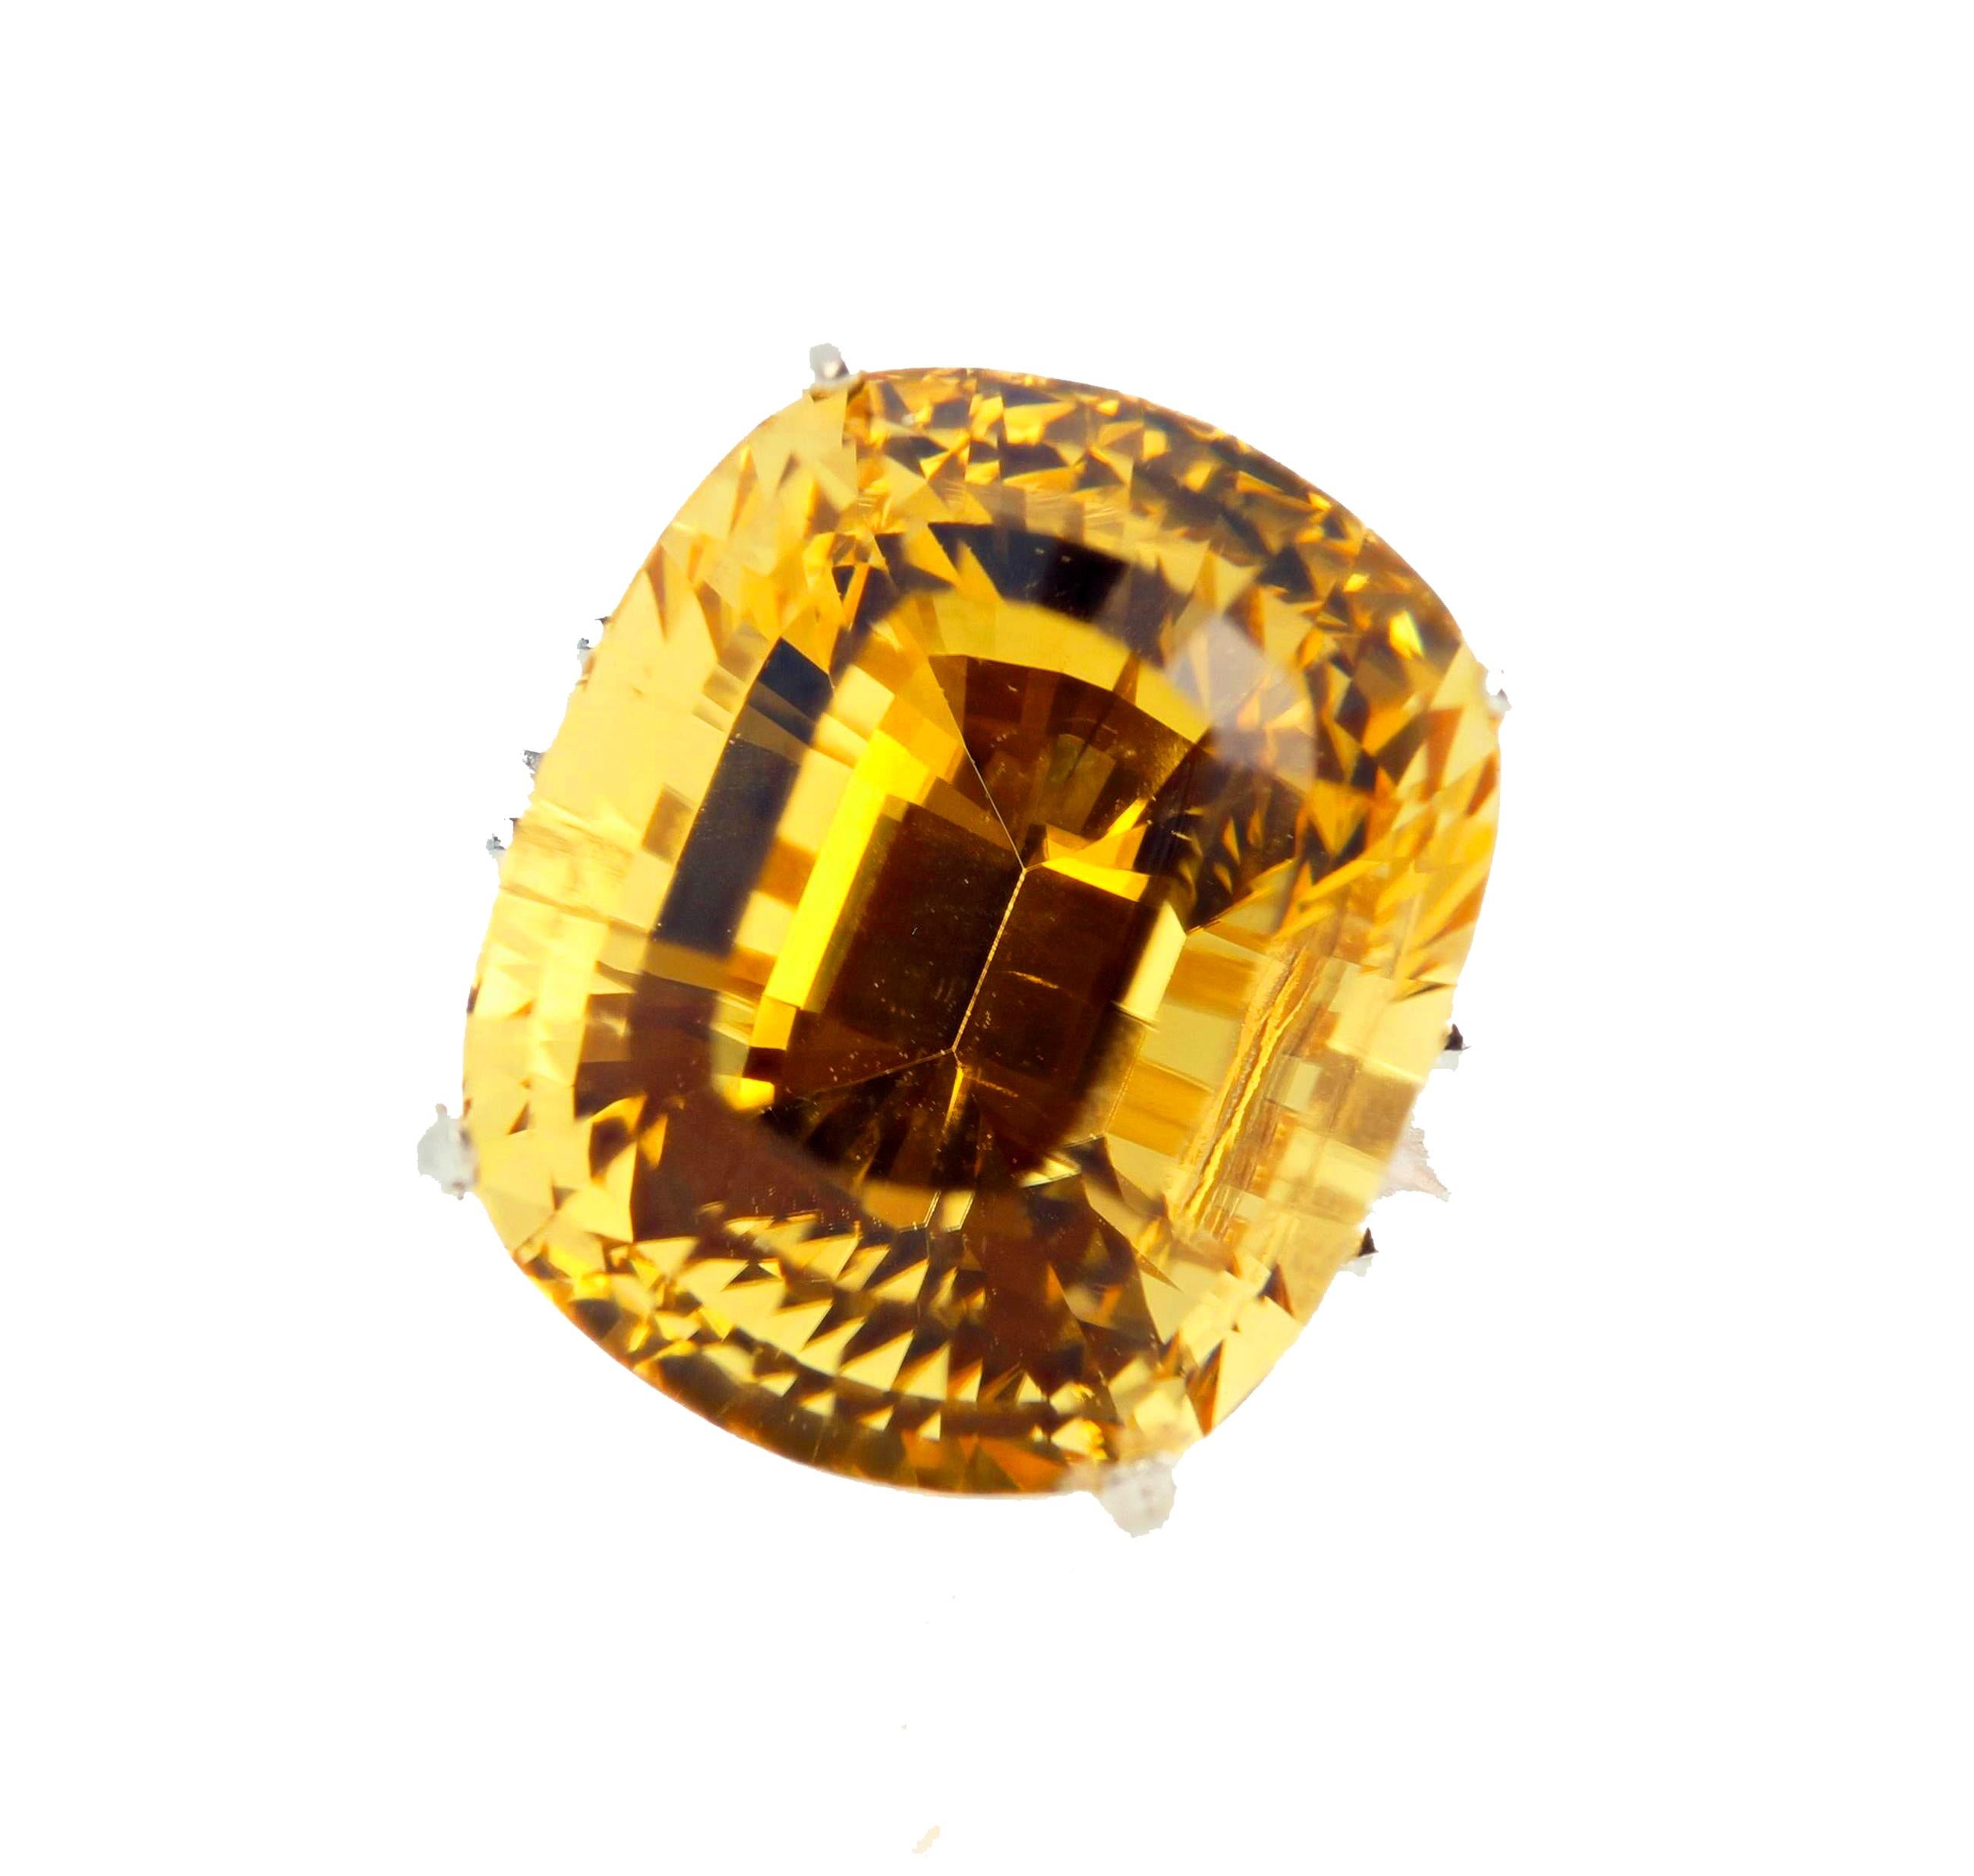 Glittering brilliant yellow Cushion cut 25.33 Carat Scapolite from Madagascar is set in a Sterling Silver ring size 6 (sizable FOR FREE).  This gorgeous Scapolite measures 18.5 mm x 15.5 mm and is absolutely eye clean.  It glitters all day and all